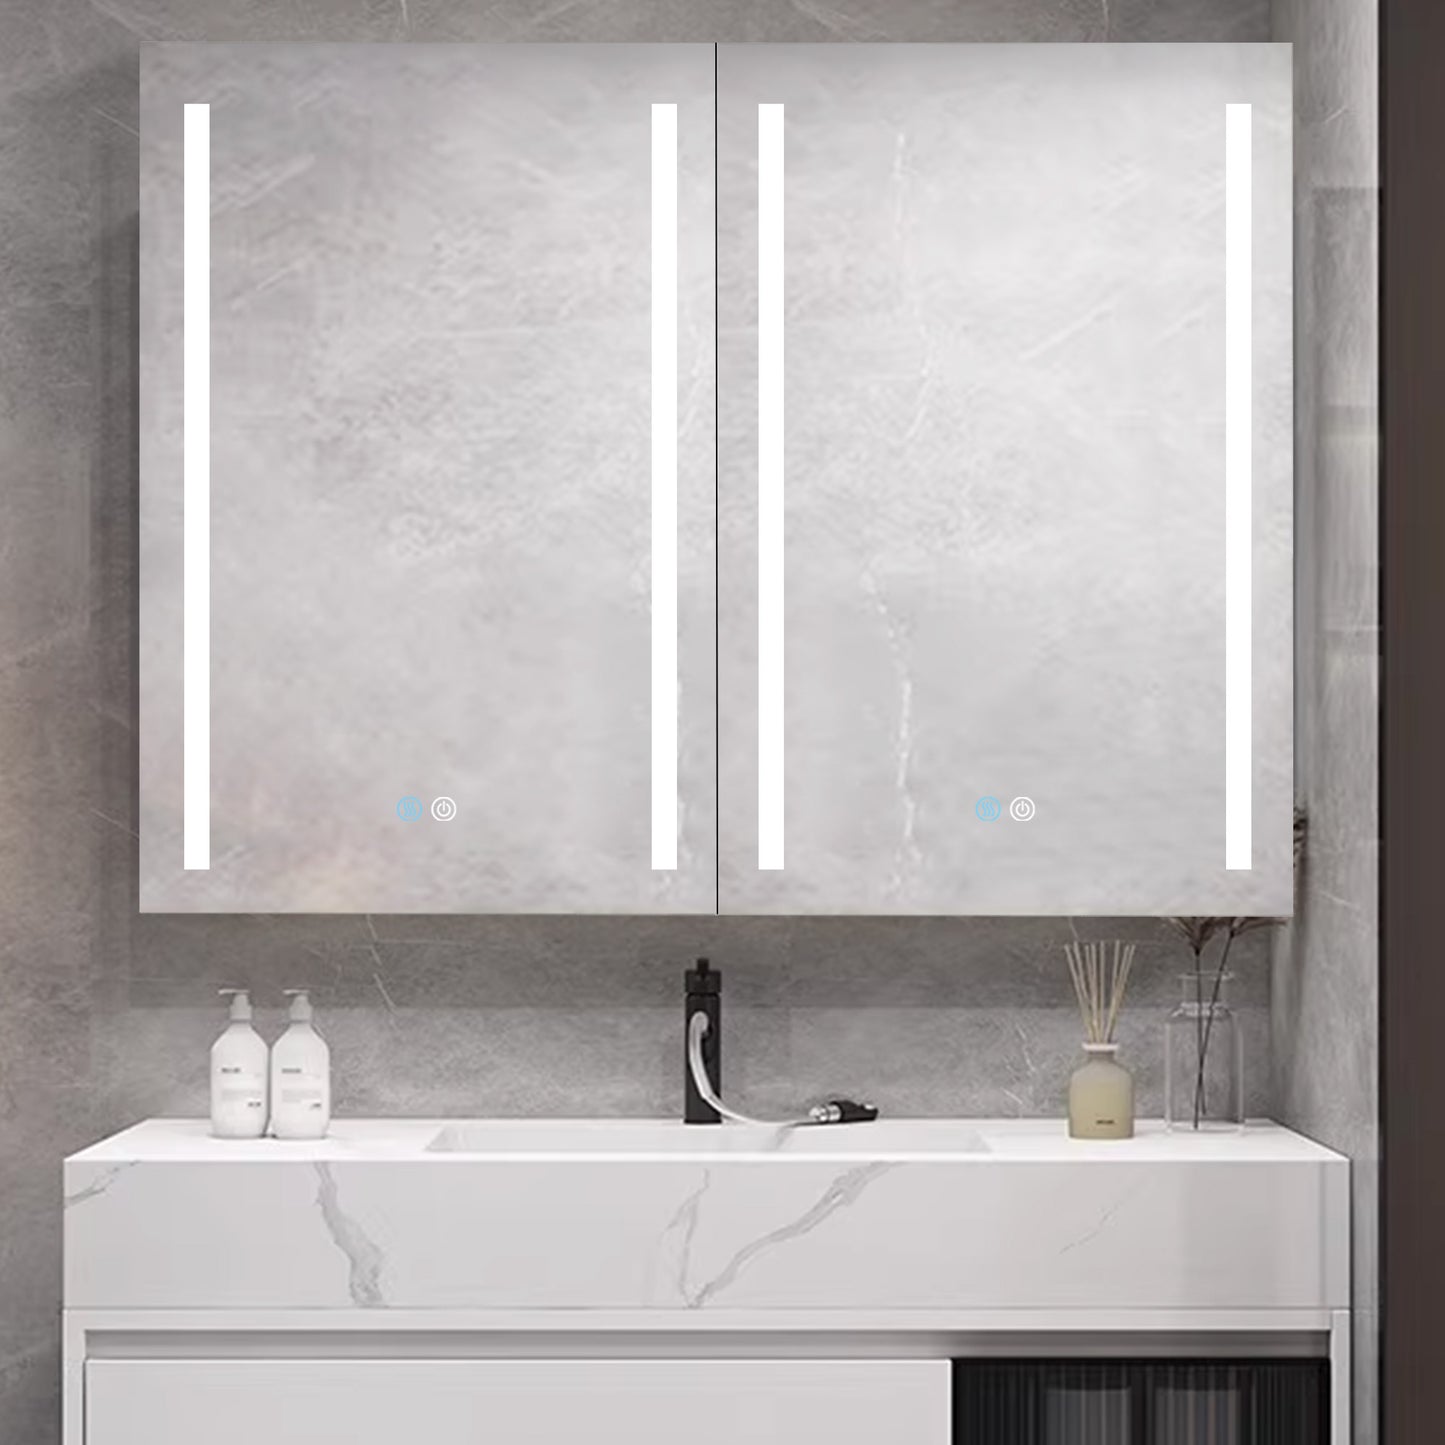 40x30 Inch LED Bathroom Medicine Cabinet Surface Mount Double Door Lighted Medicine Cabinet, Medicine Cabinets for Bathroom with Mirror Defogging, Dimmer White